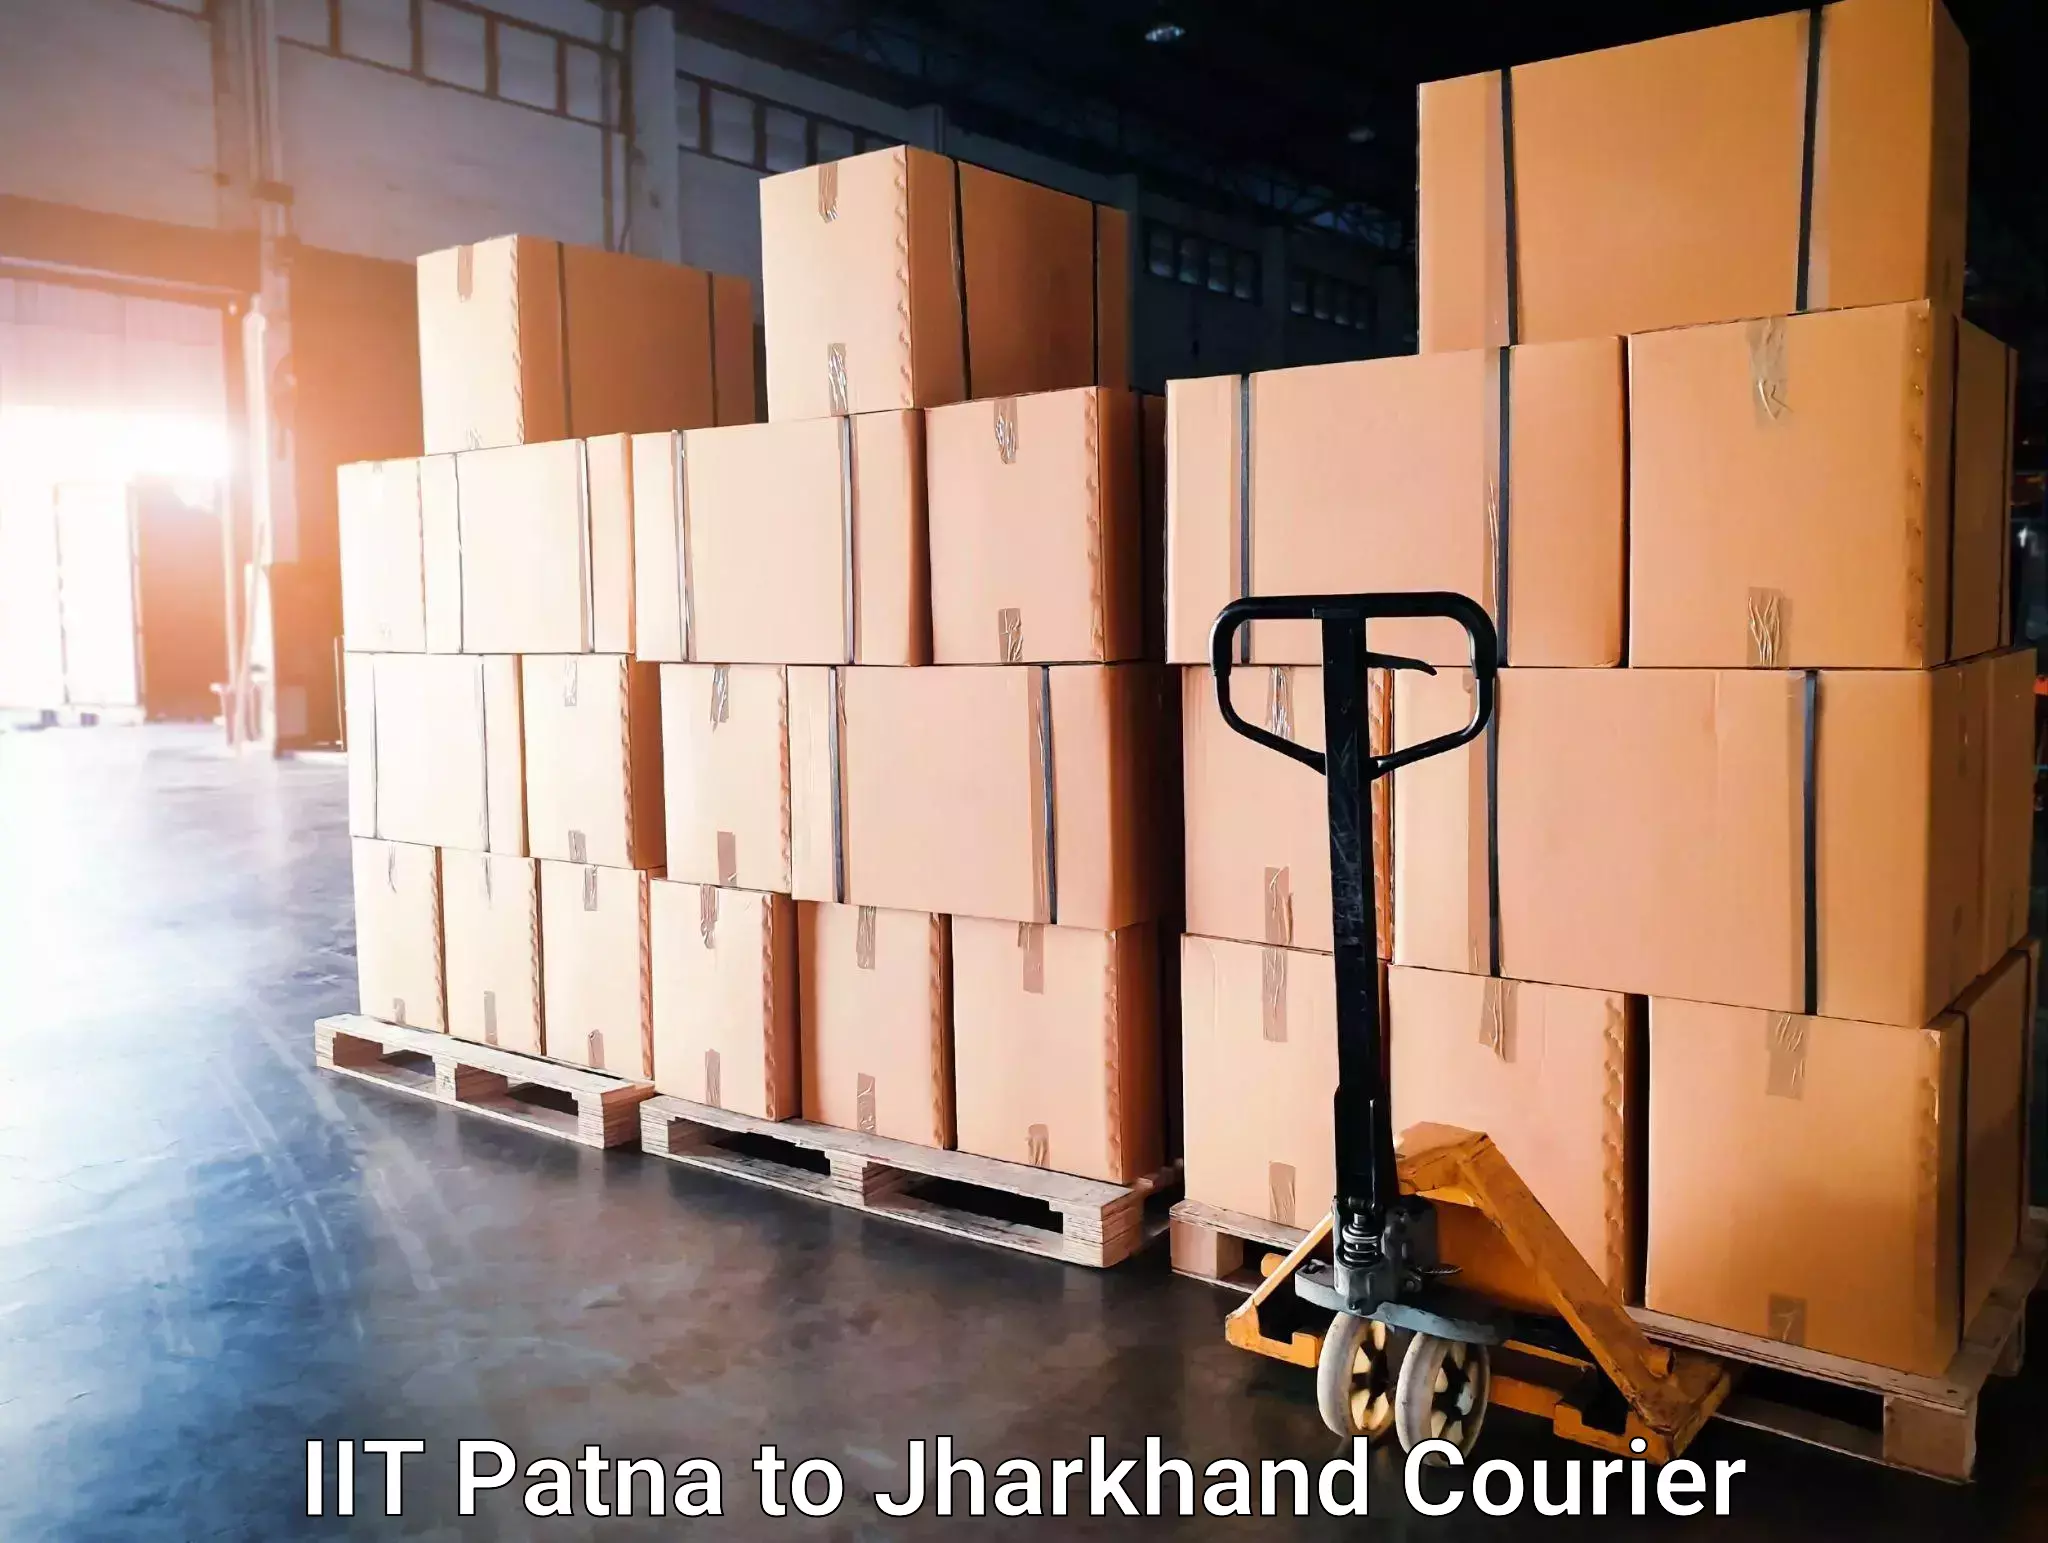 Moving service excellence IIT Patna to Dhanbad